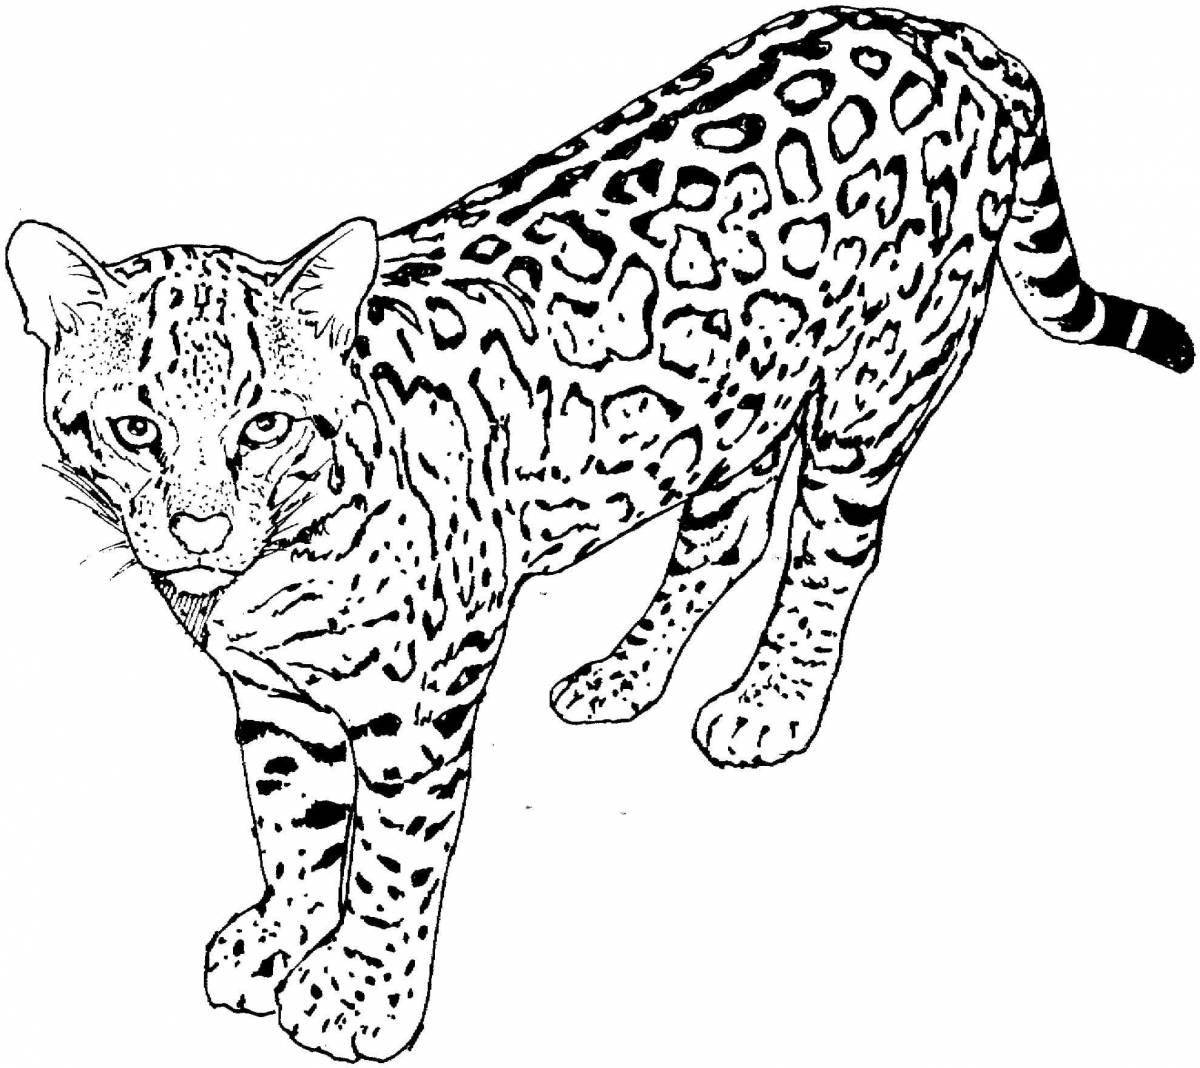 Creative leopard coloring book for kids